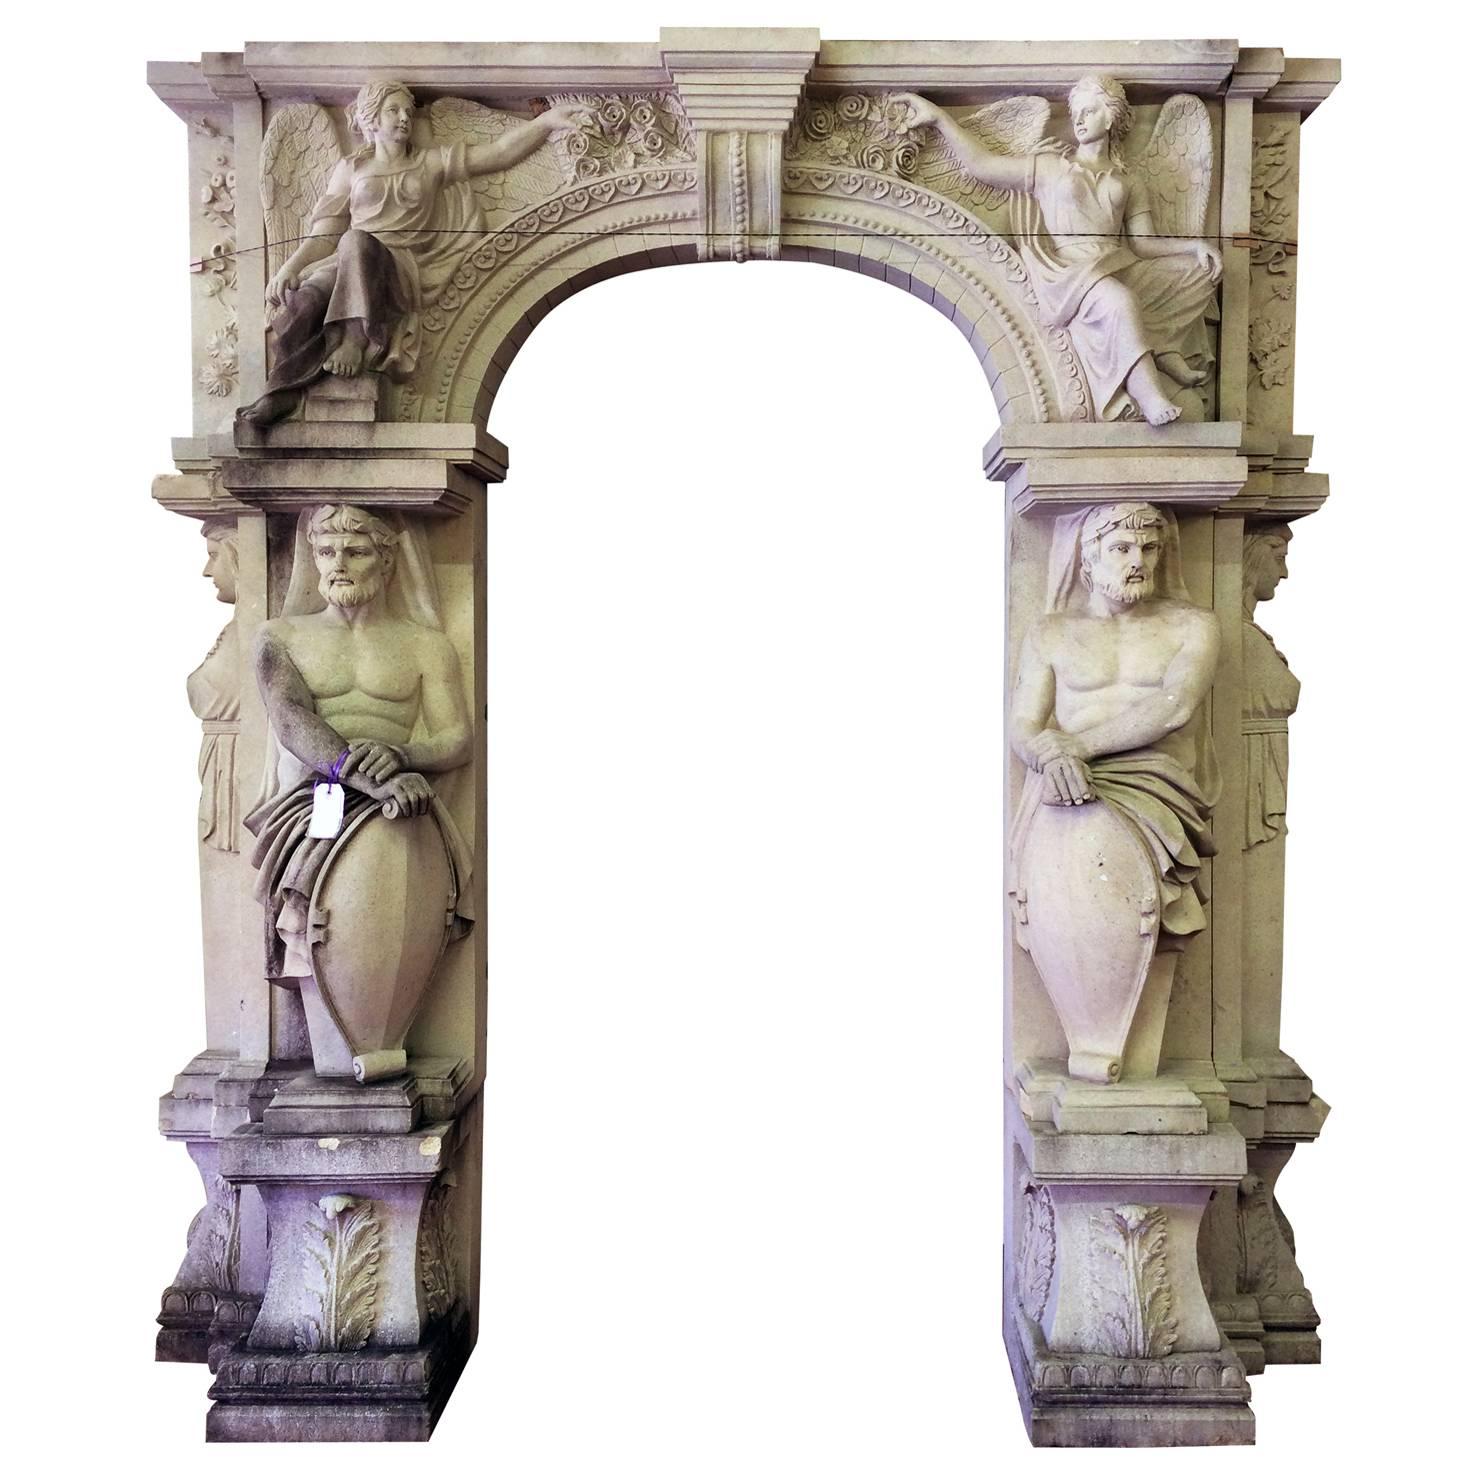 Stone Entry with Atlas Figures, Winged Ladies and Acanthus Leaves